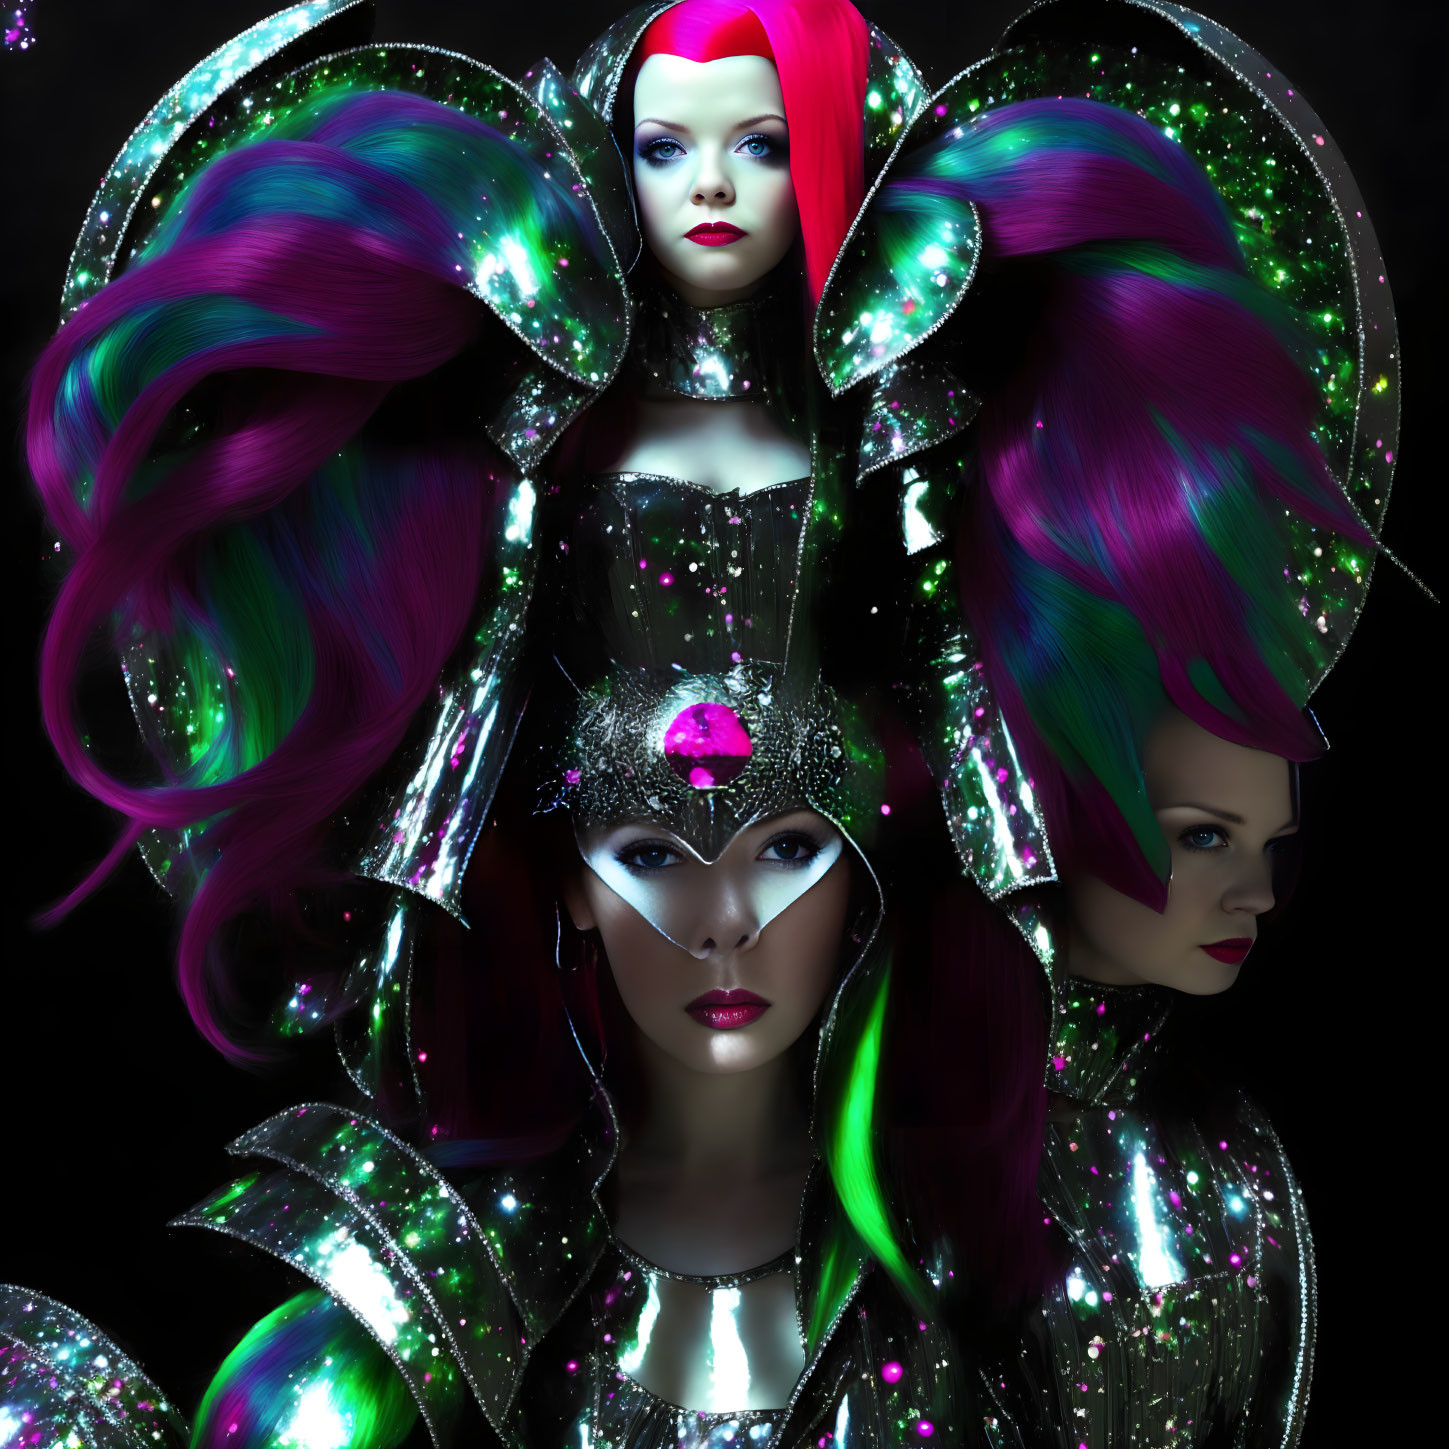 Three women in iridescent costumes and vibrant hair on dark background